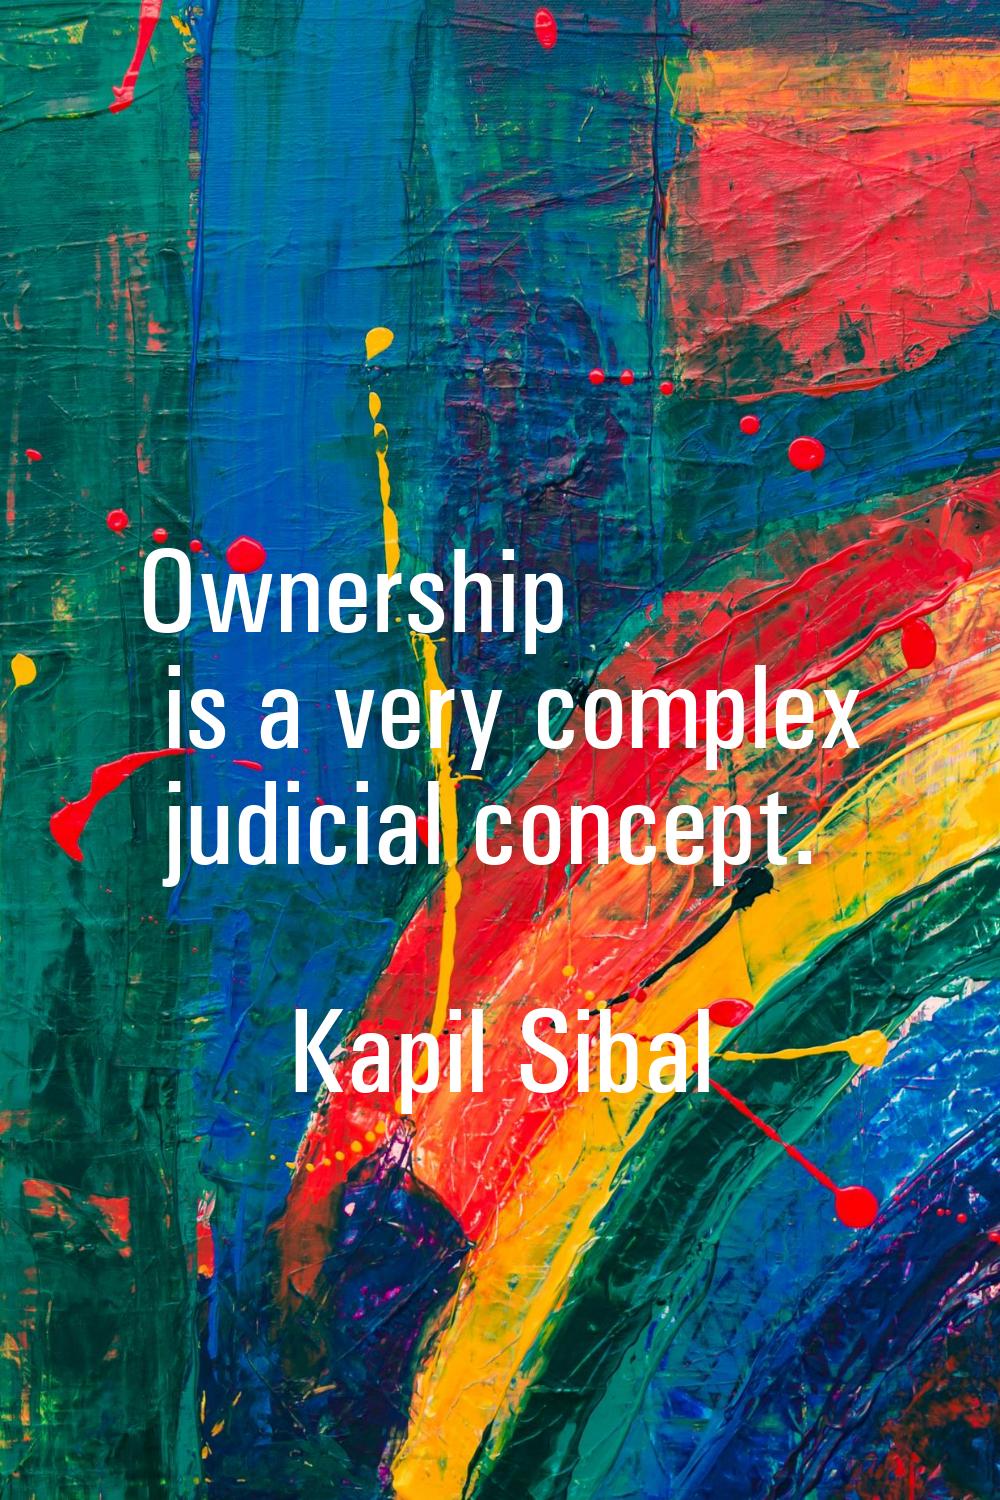 Ownership is a very complex judicial concept.